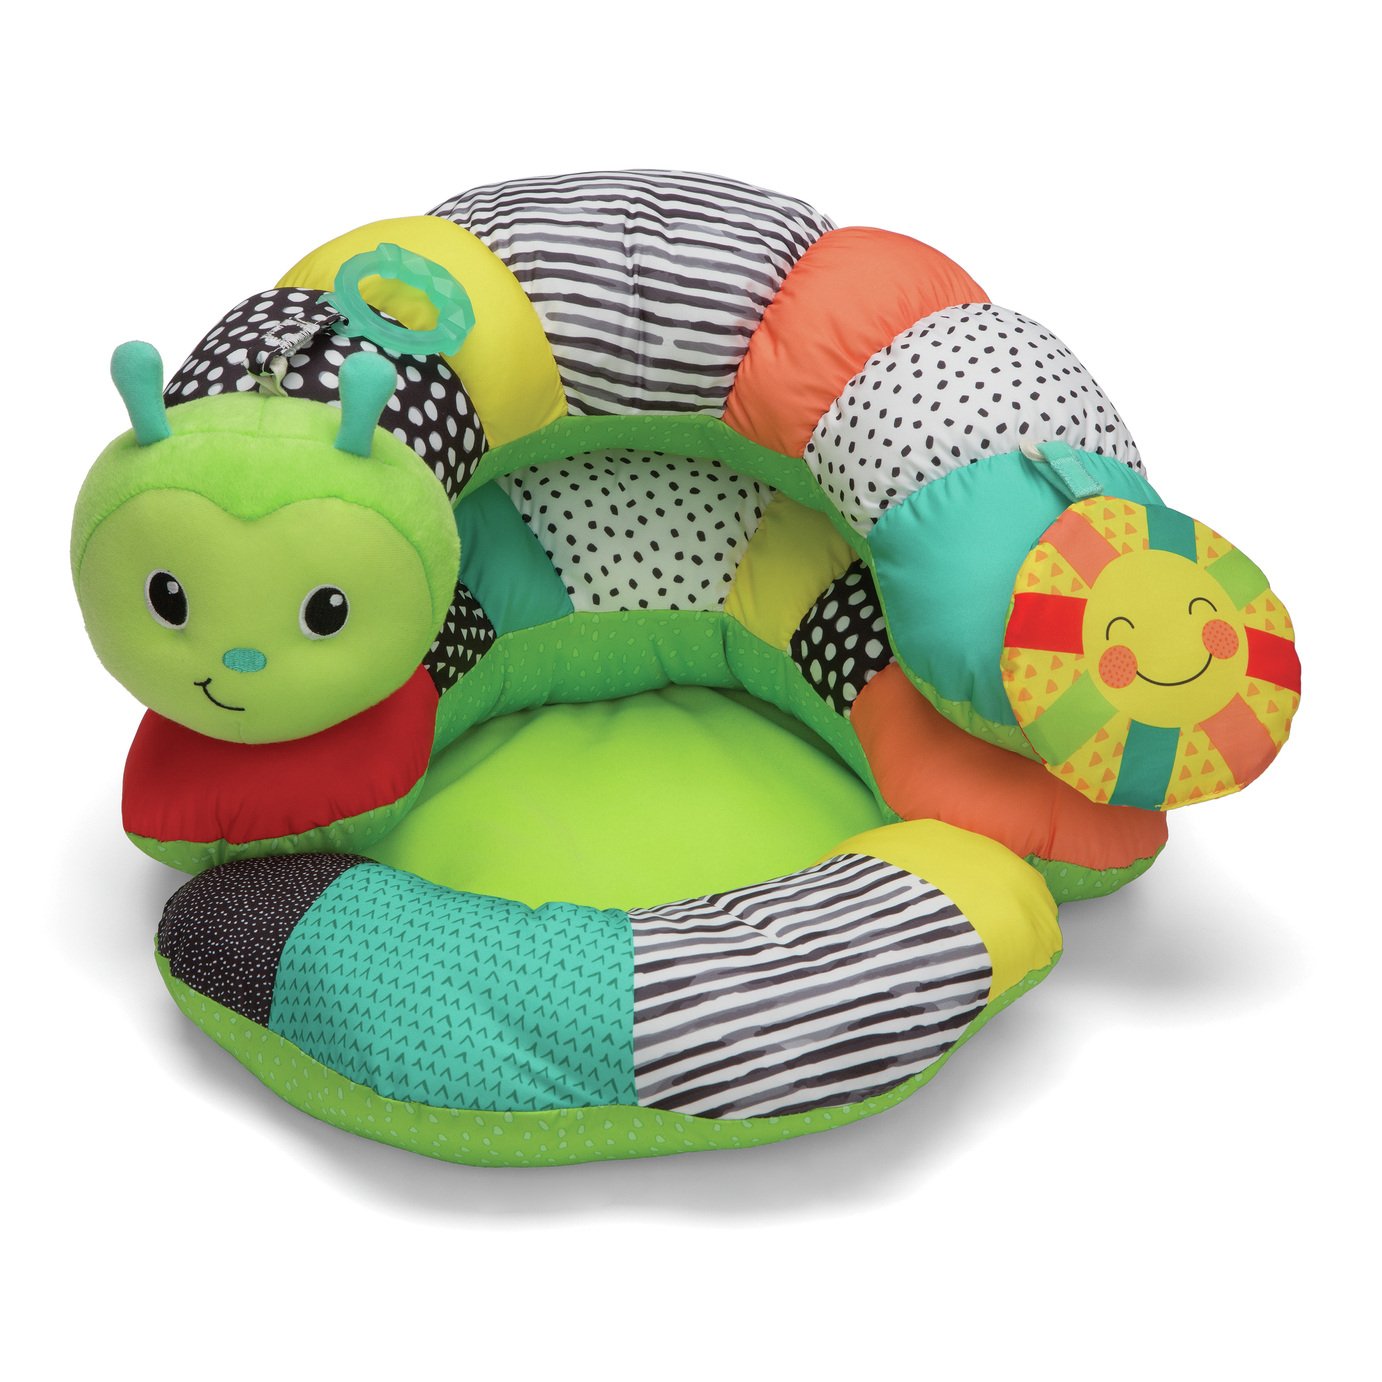 Infantino Tummy Time & Seated Support Playmat